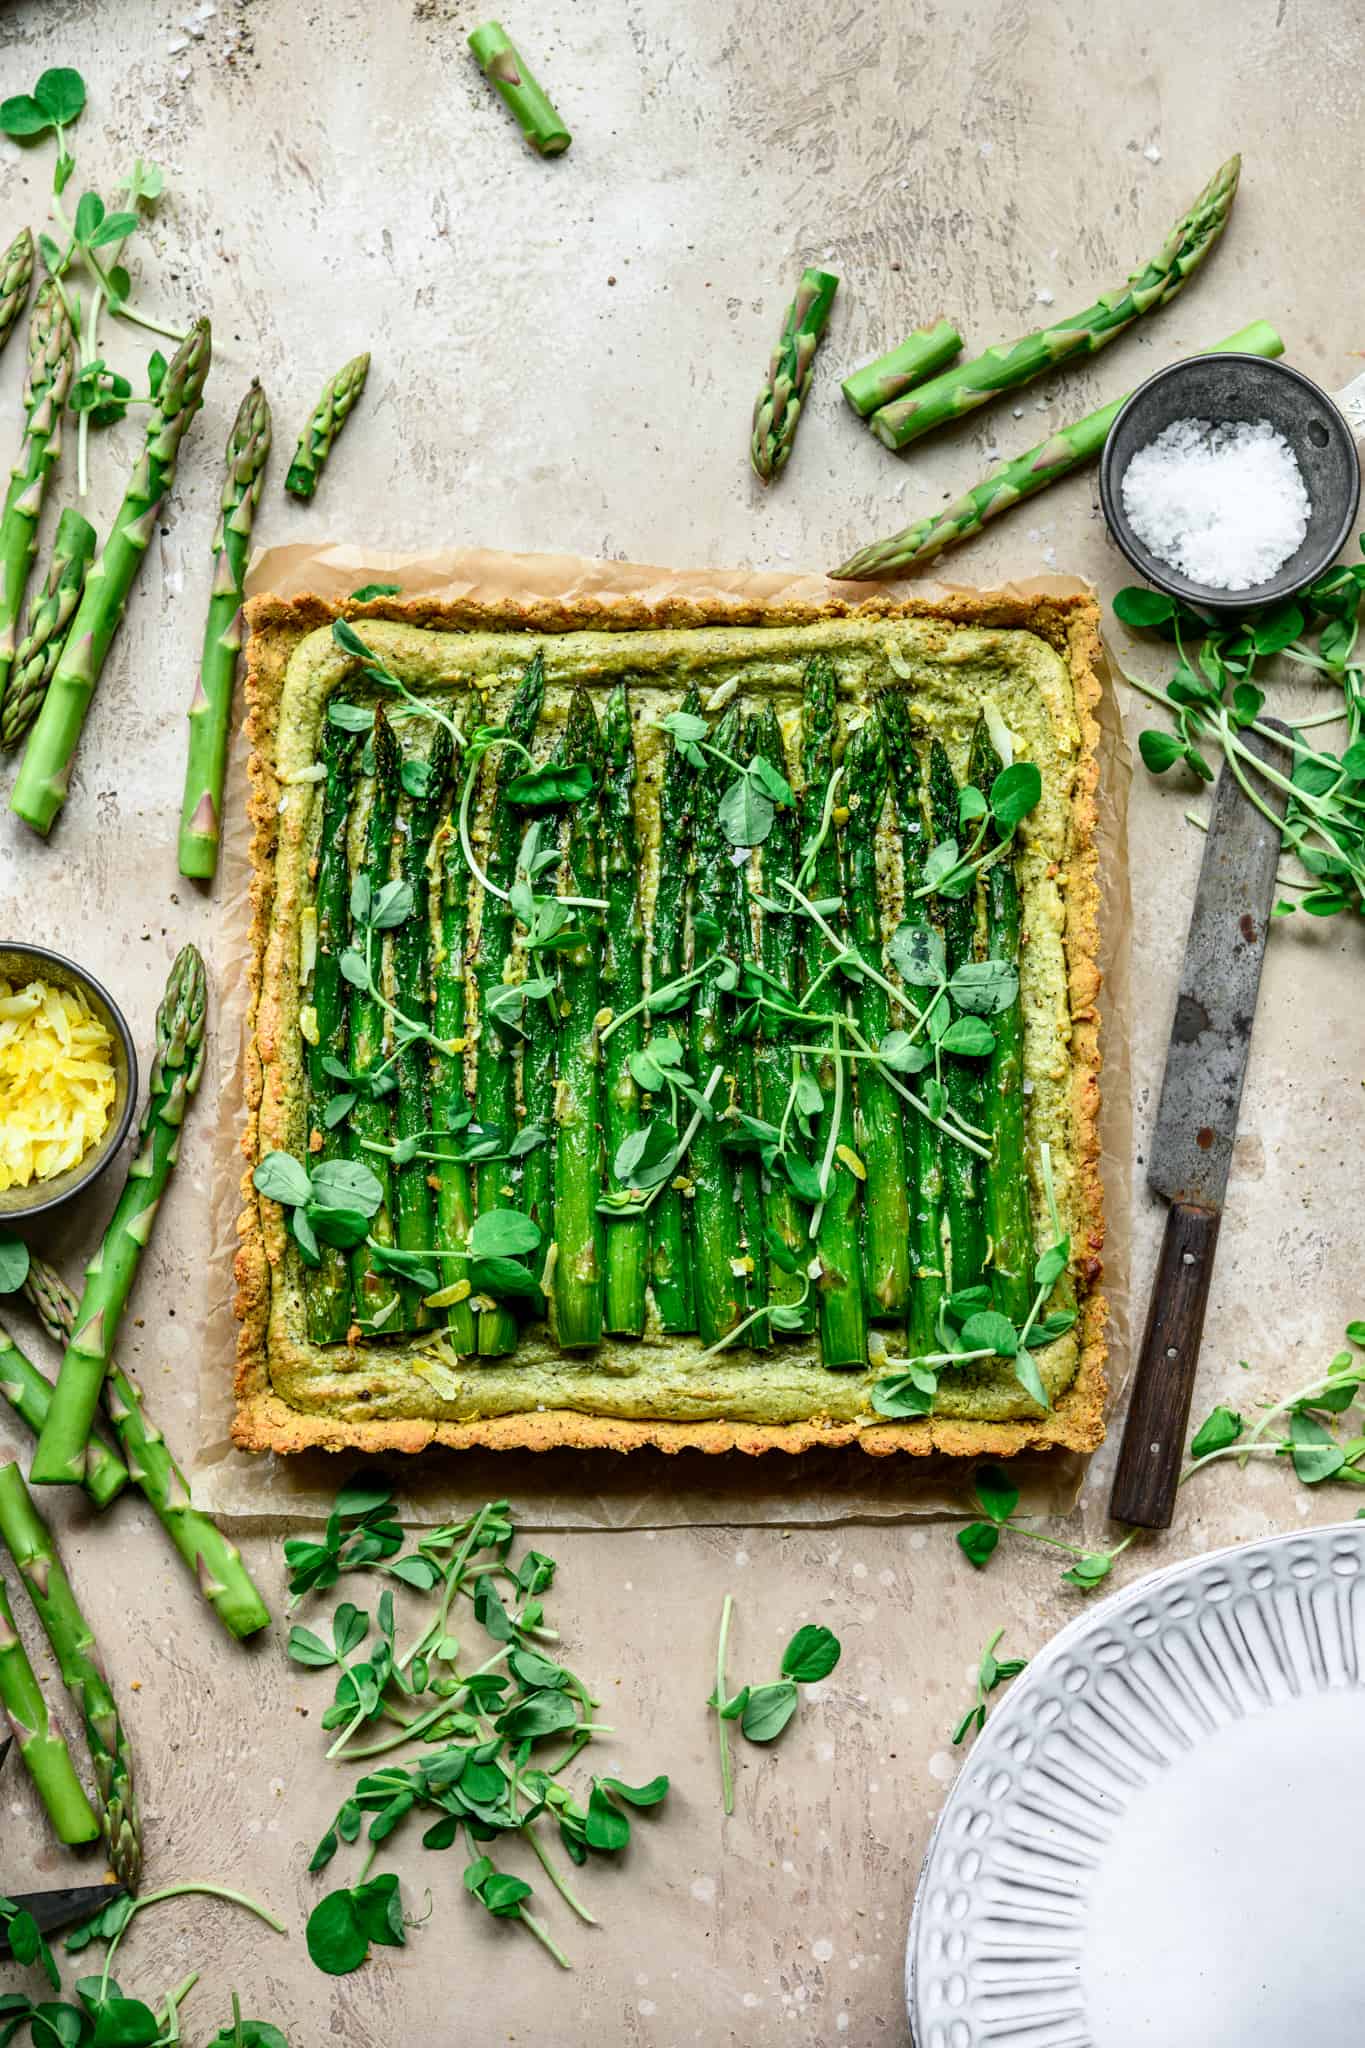 Overhead view of vegan ricotta and asparagus tart with a cornmeal crust on light tan background